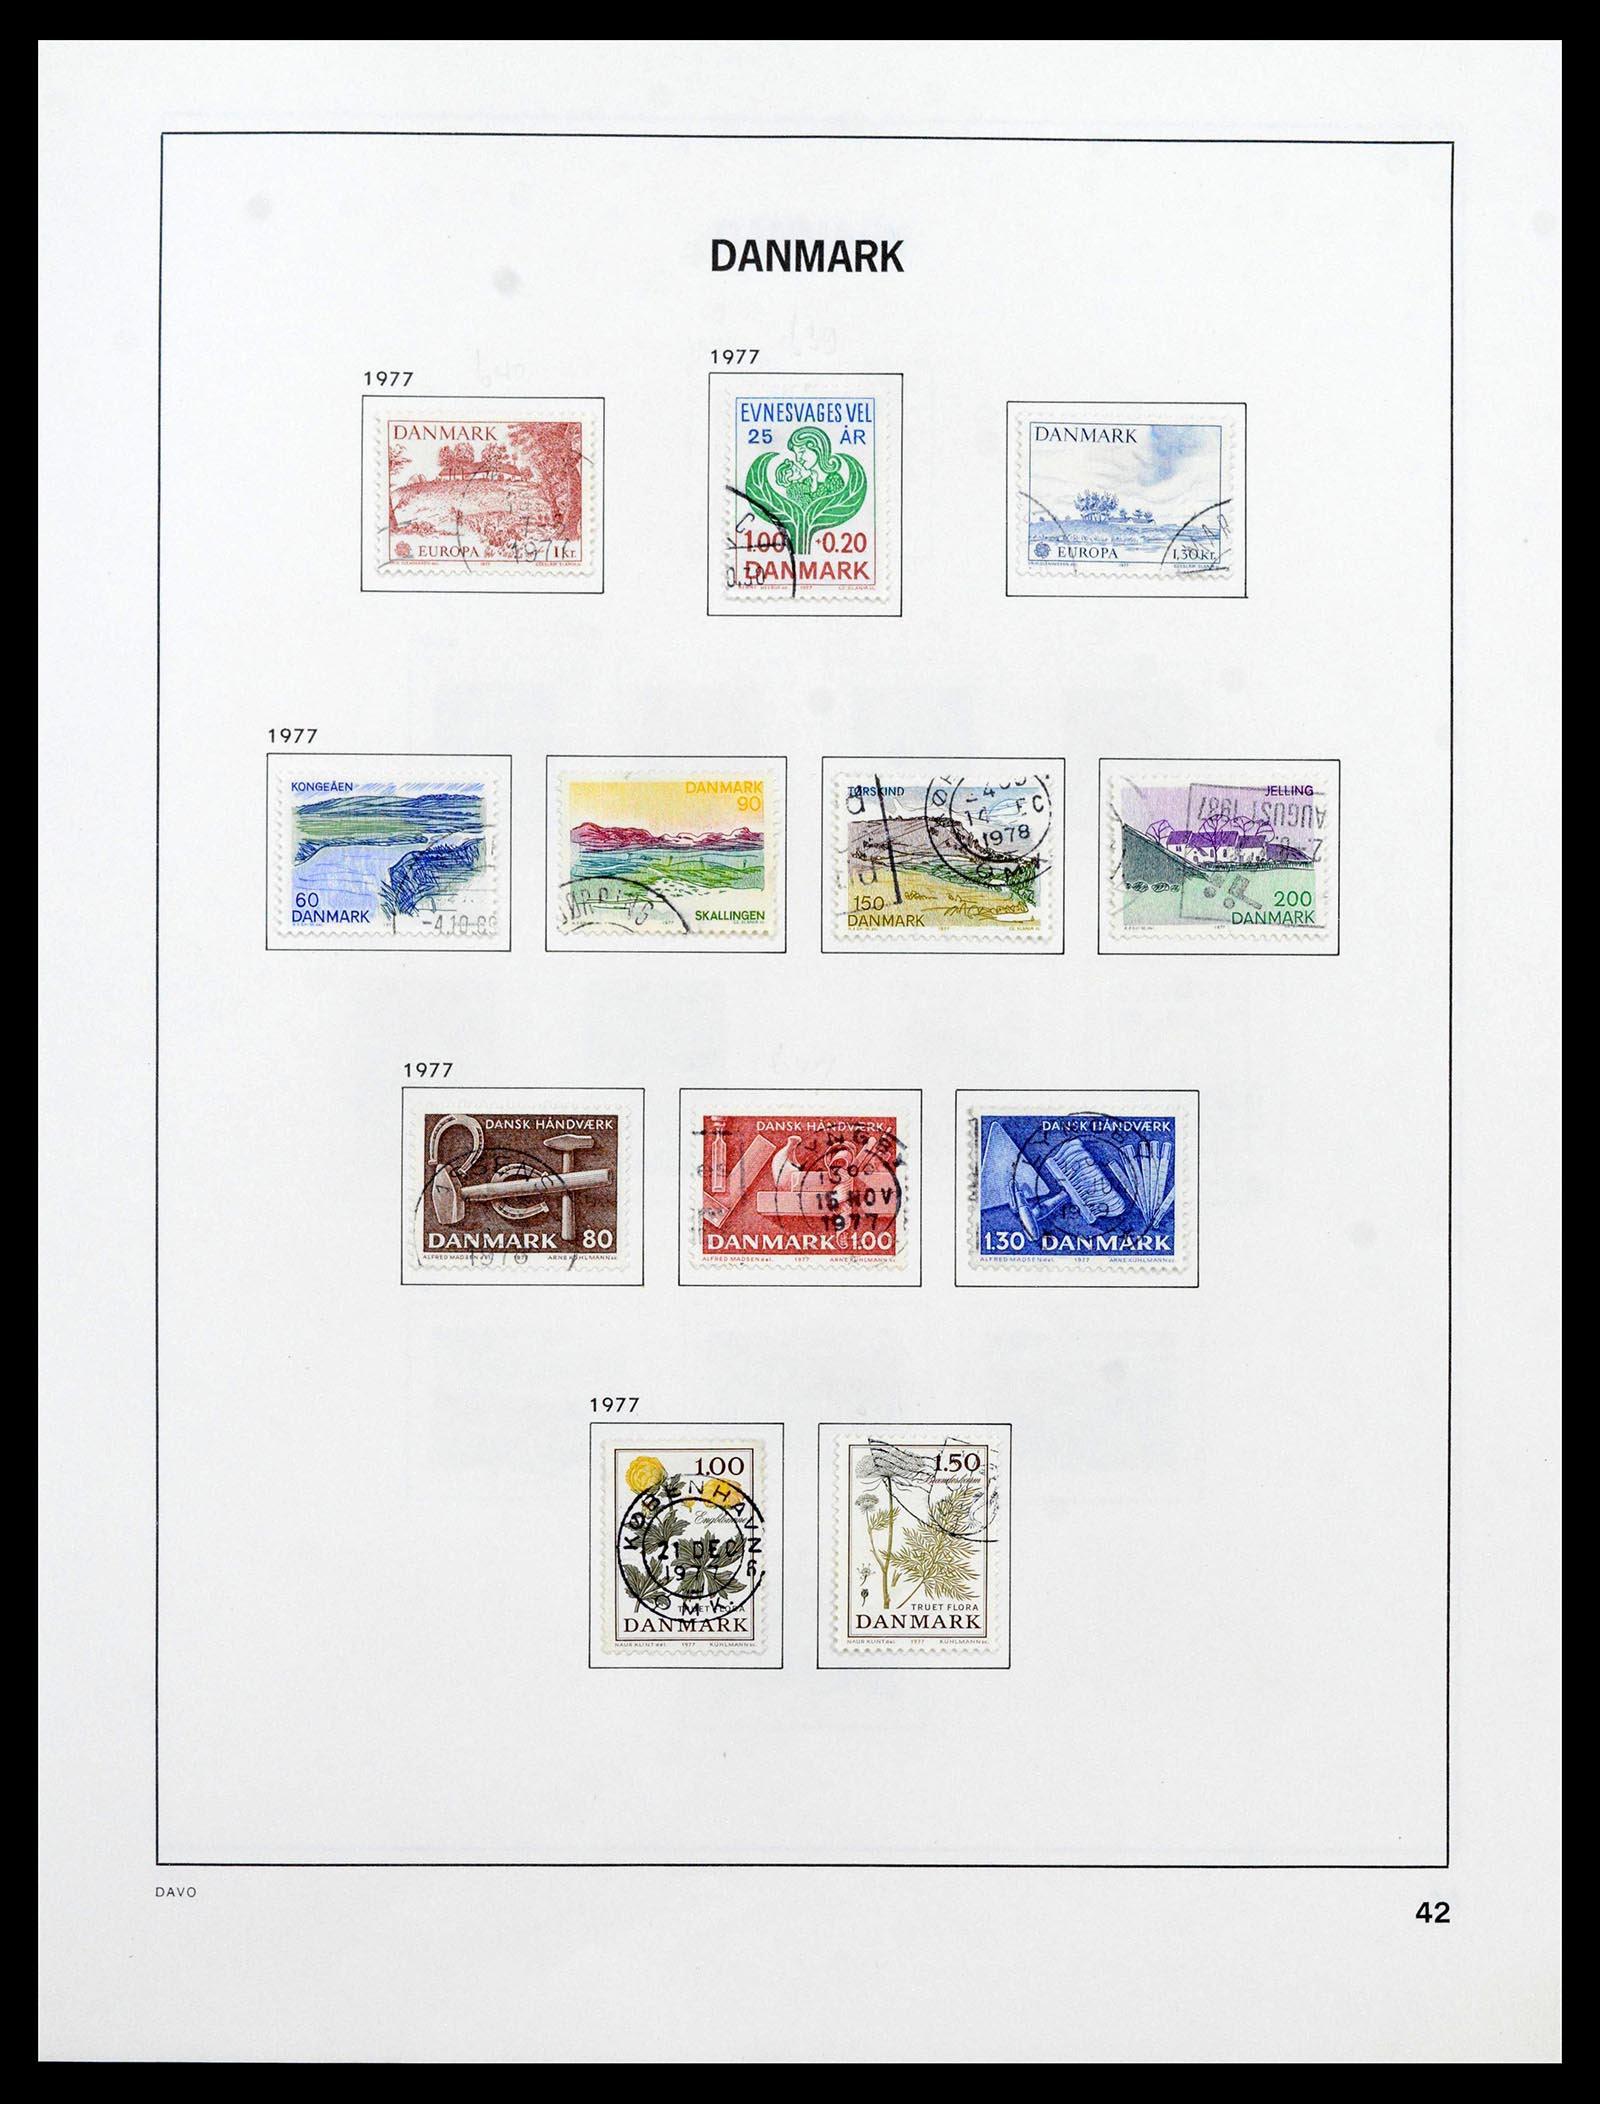 39428 0044 - Stamp collection 39428 Denmark 1851-2019.